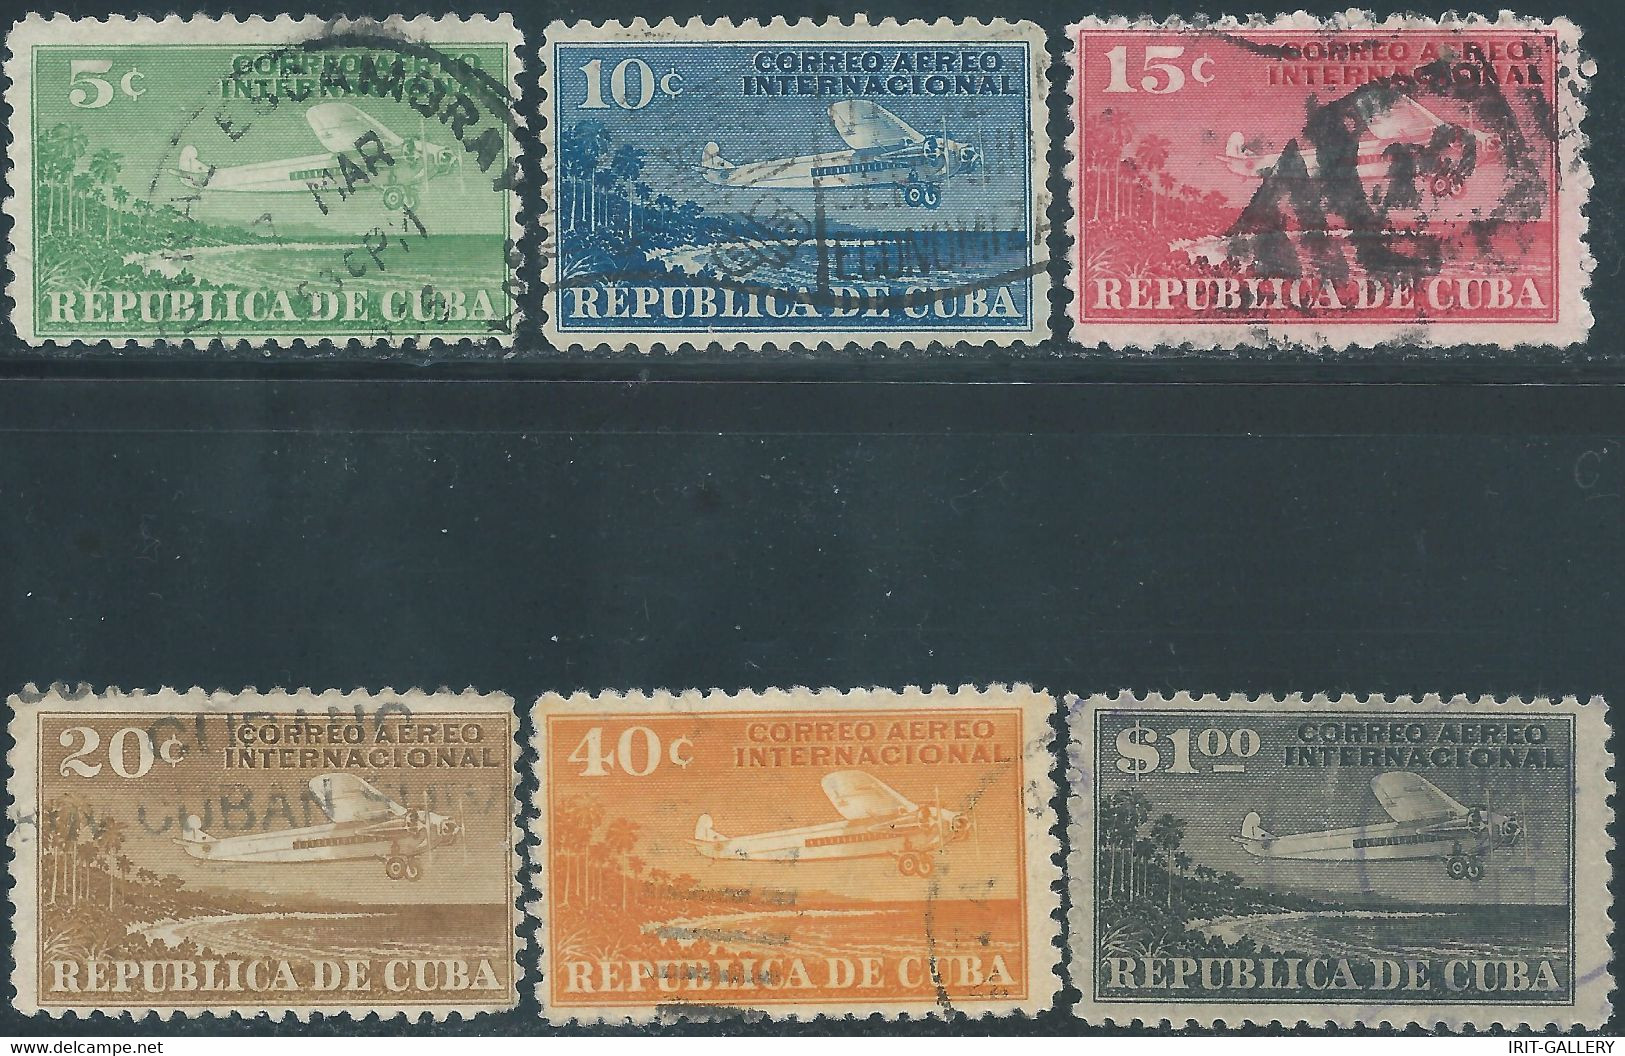 CUBA,REPUBLIC OF CUBA,1931 Airmail - For International Use - Used - Used Stamps